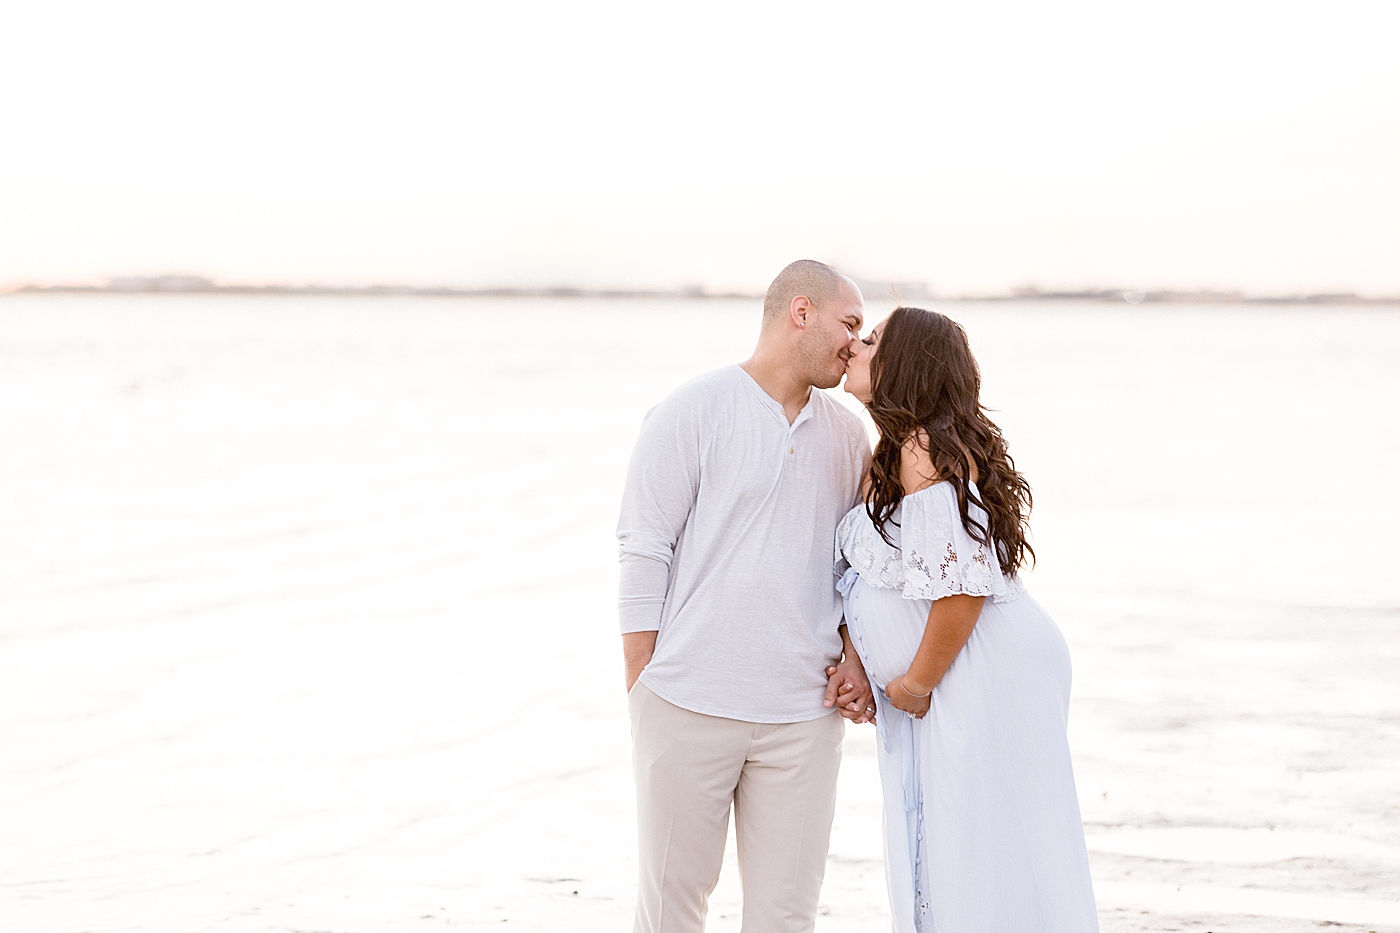 Couple kissing during maternity photoshoot at the beach in Tampa, FL. Photo by Brittany Elise Photography.